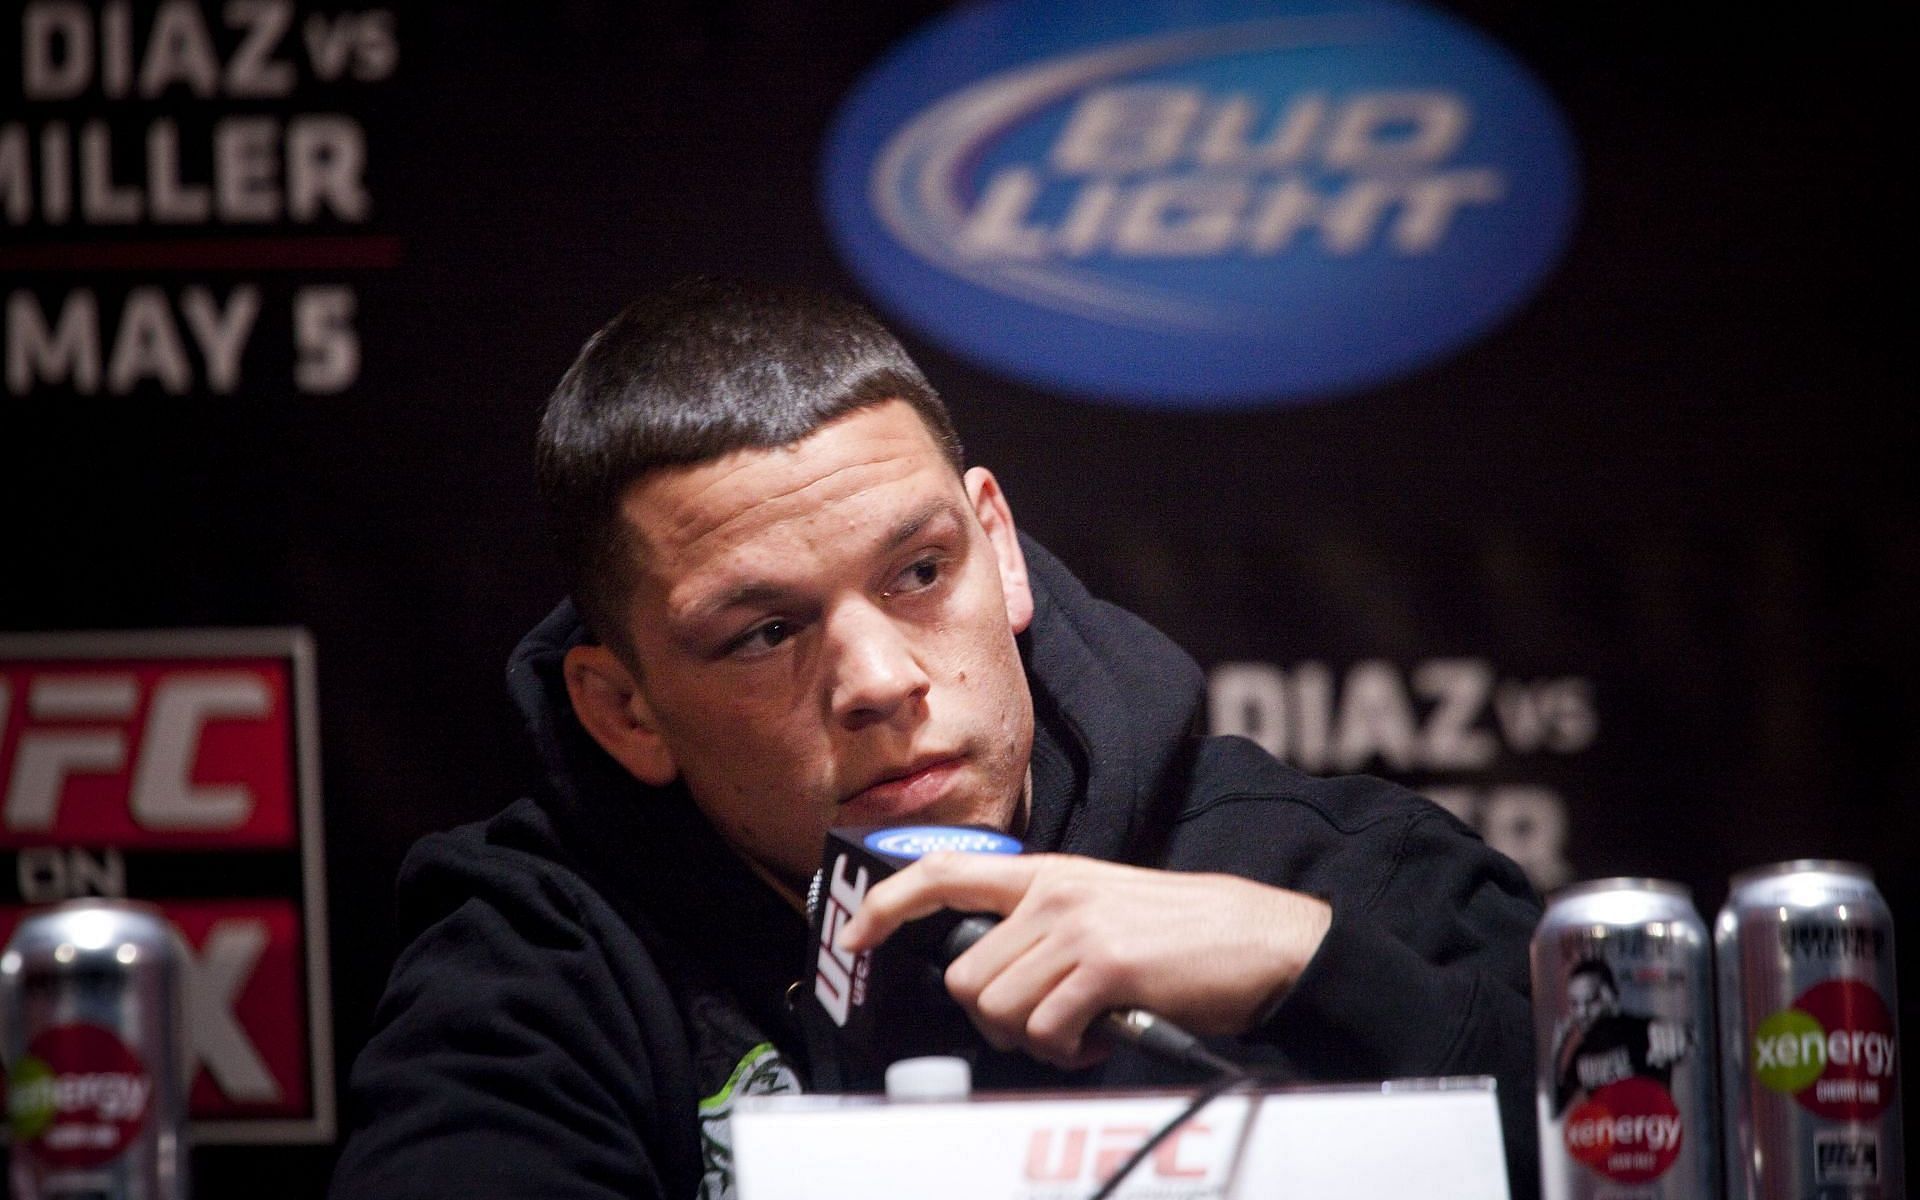 UFC welterweight contender Nate Diaz during a press conference